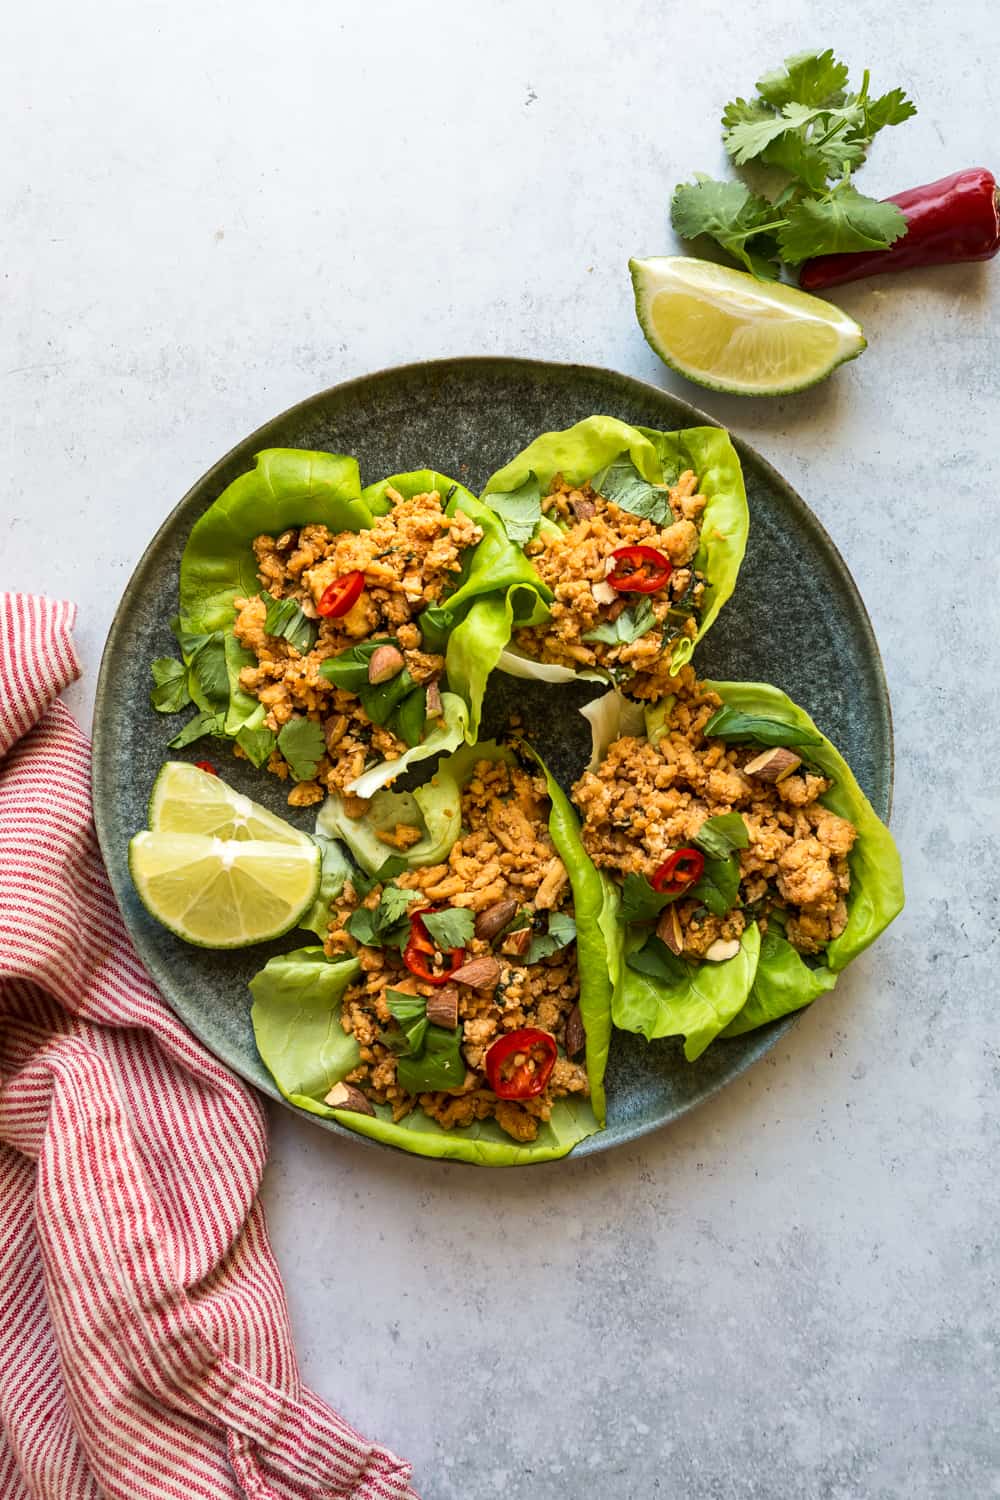 Thai Basil Chicken Lettuce Wraps on a plate.